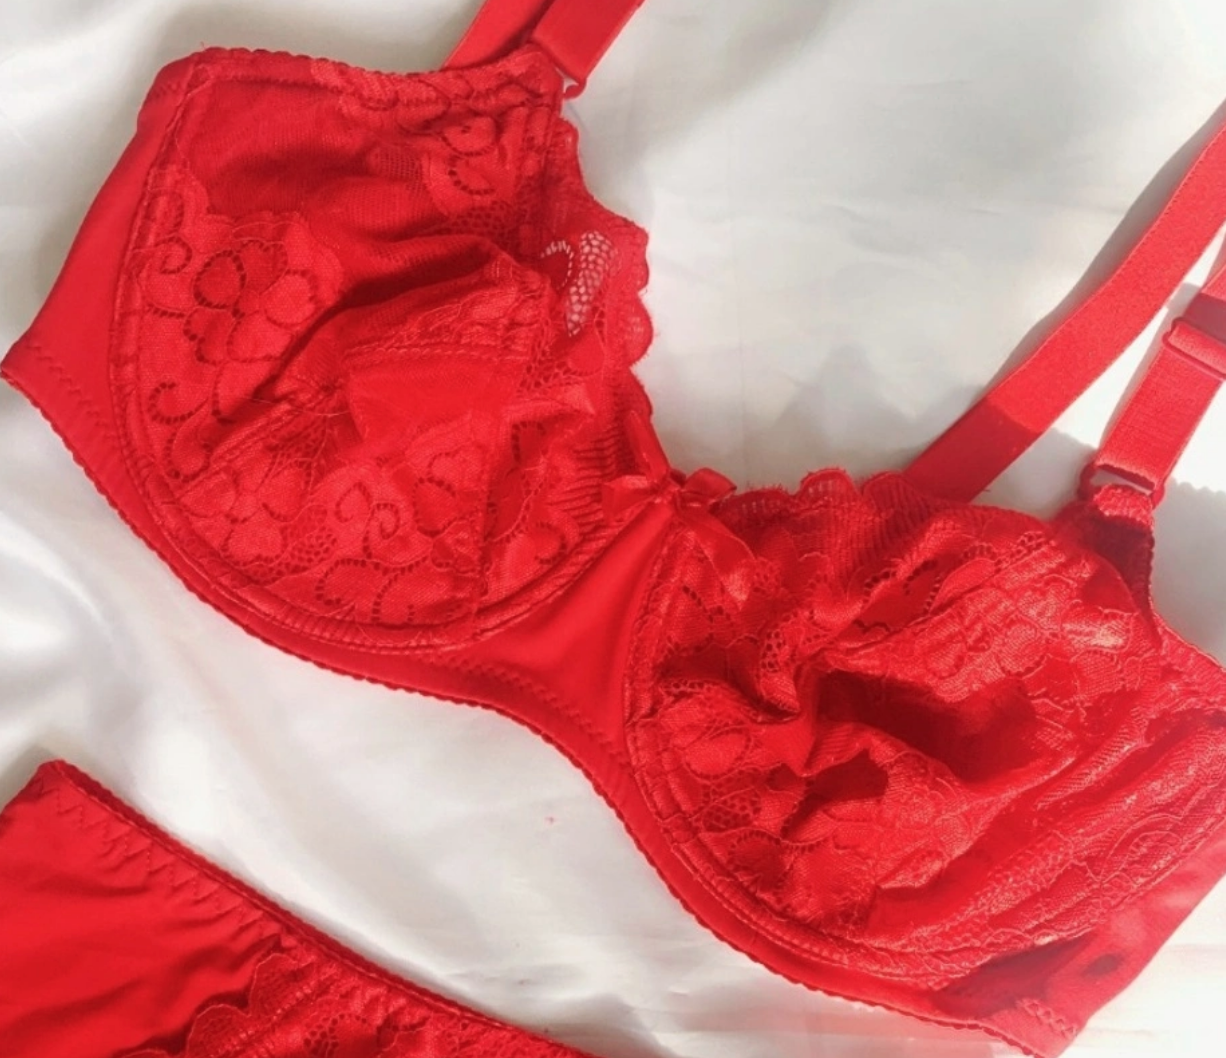 Scarlet Lingerie Reviews: Get All The Details At Hello Subscription!